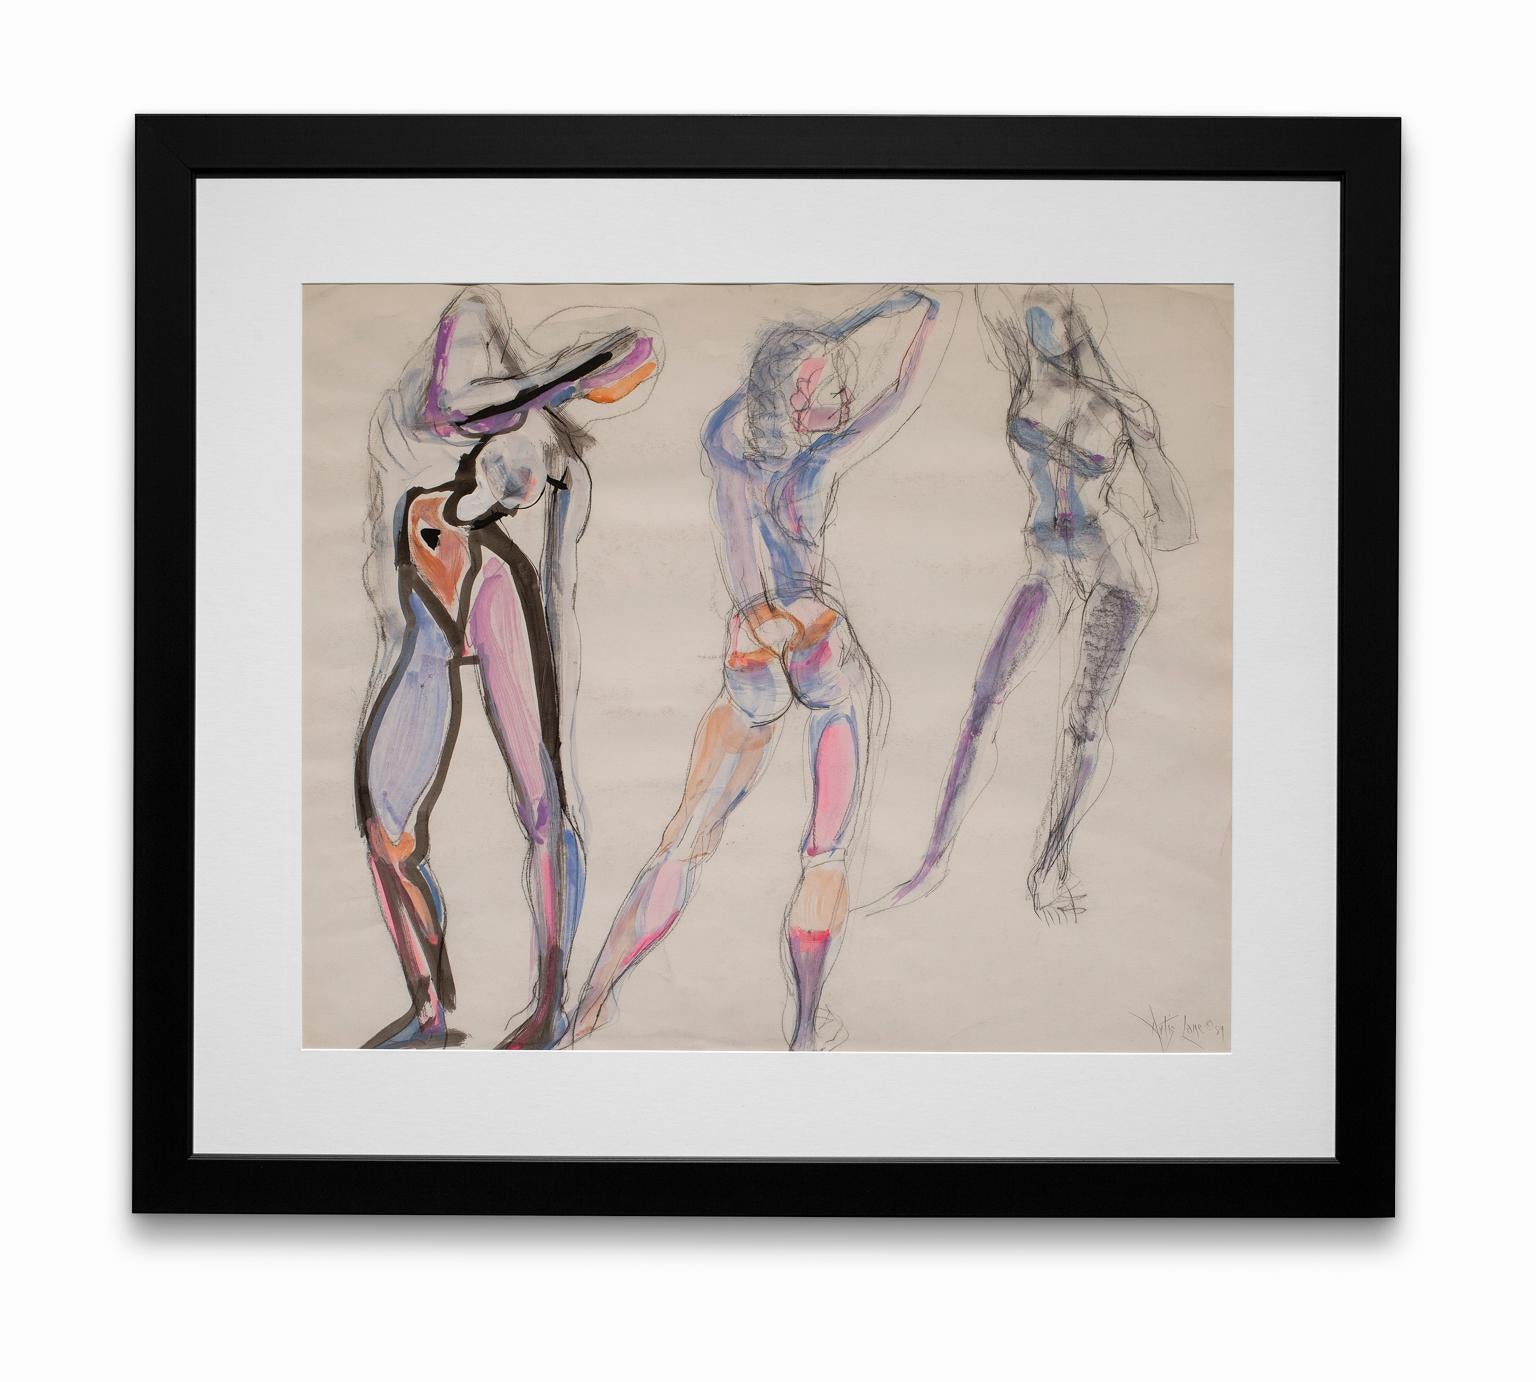 Artis Lane Nude Painting - "Dancers", Mixed Media on Paper